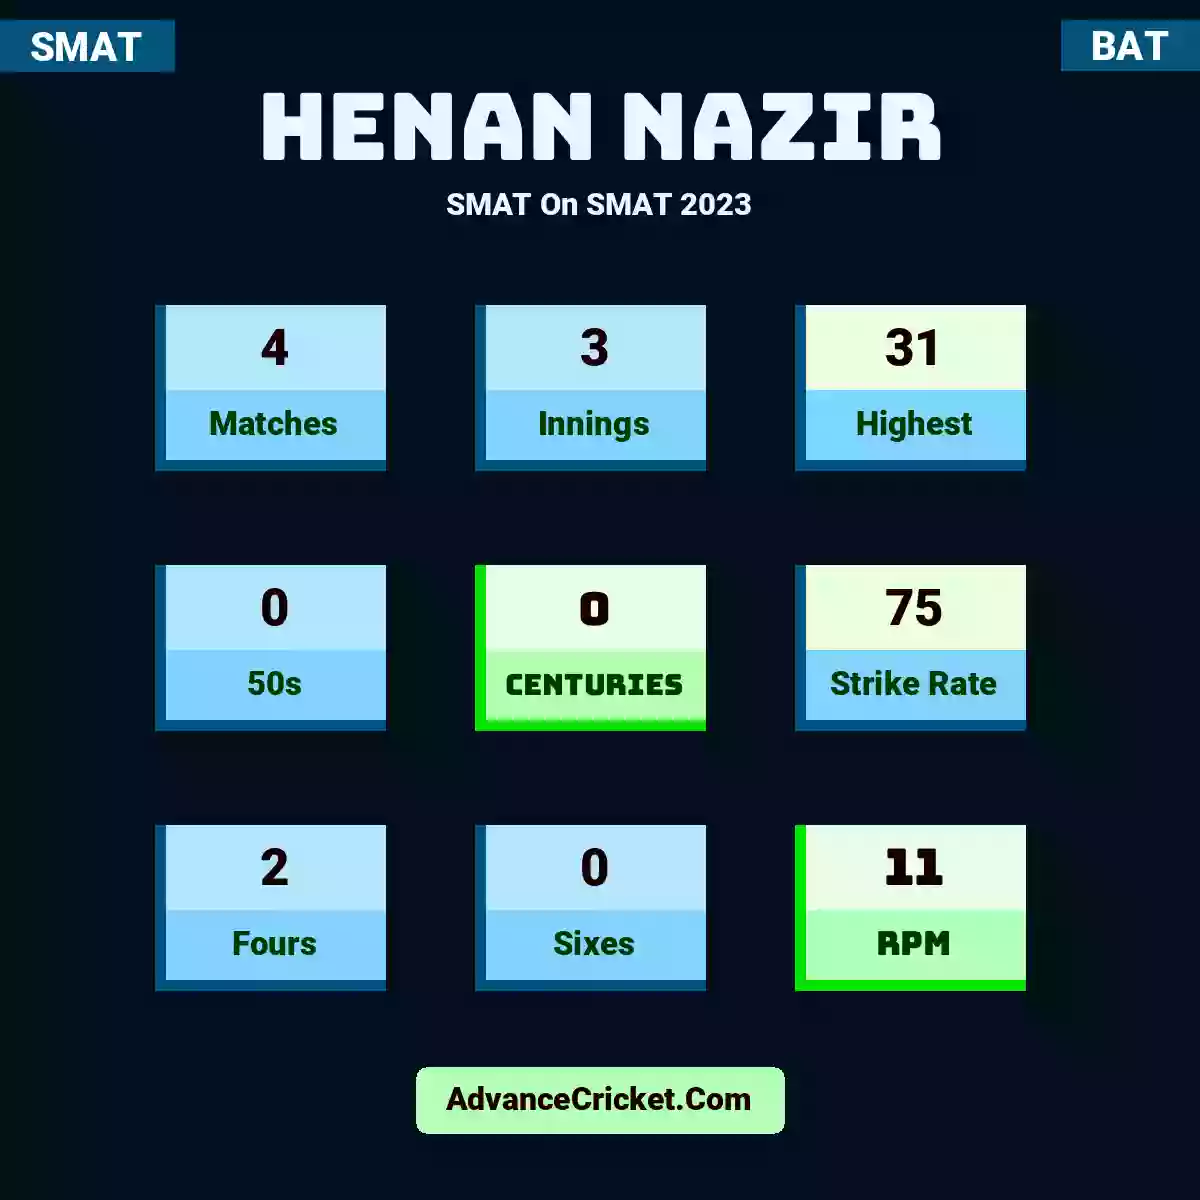 Henan Nazir SMAT  On SMAT 2023, Henan Nazir played 4 matches, scored 31 runs as highest, 0 half-centuries, and 0 centuries, with a strike rate of 75. H.Nazir hit 2 fours and 0 sixes, with an RPM of 11.